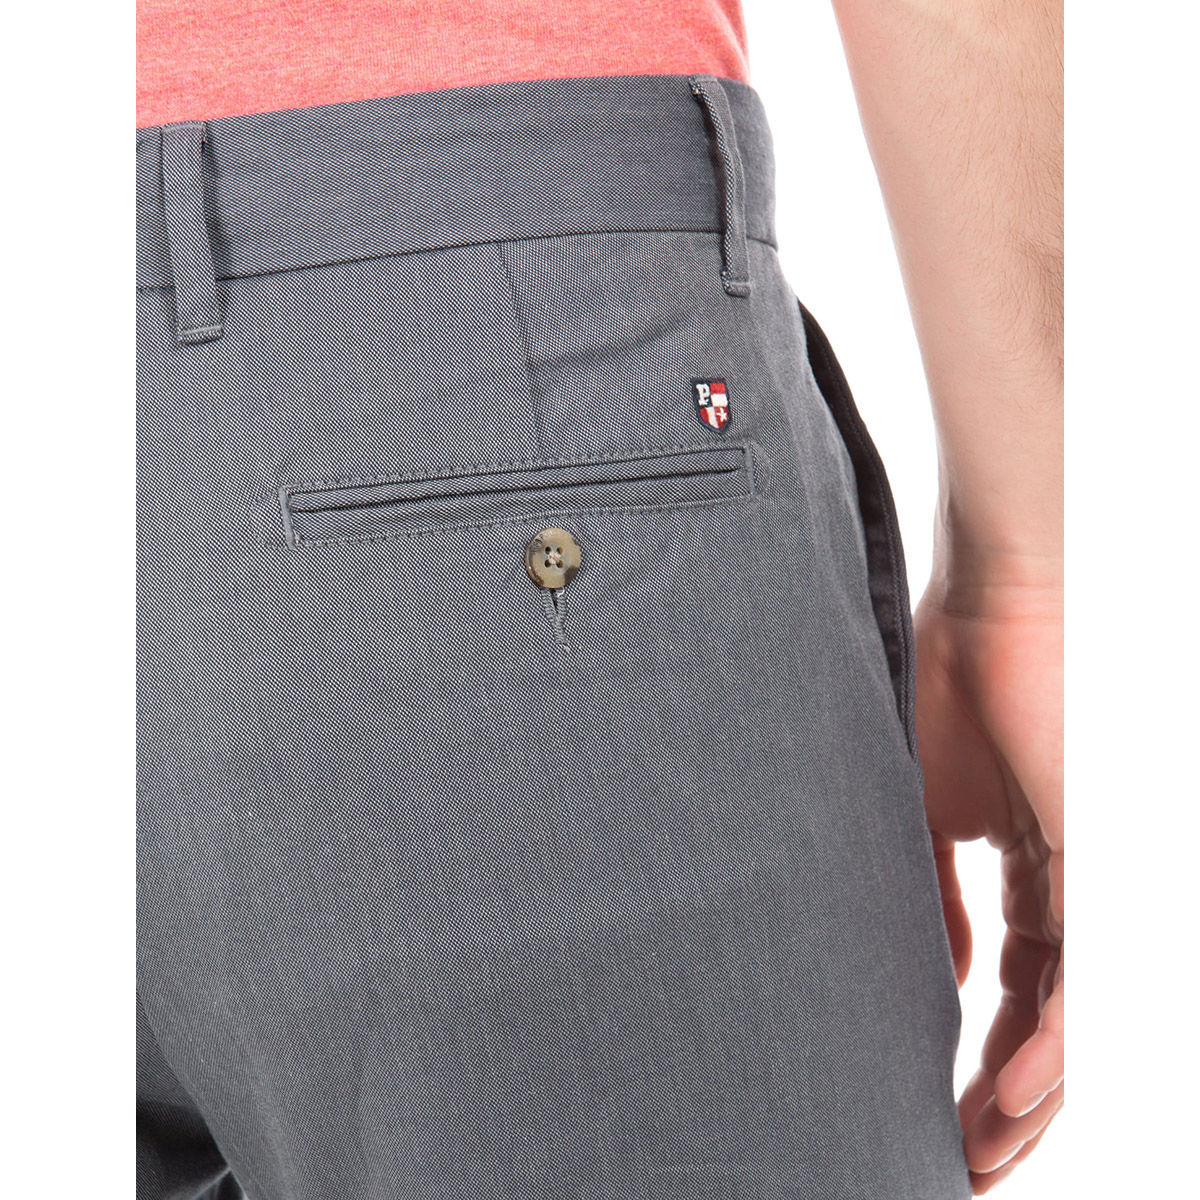 US POLO ASSN Slim Fit Men Multicolor Trousers  Buy US POLO ASSN Slim  Fit Men Multicolor Trousers Online at Best Prices in India  Flipkartcom